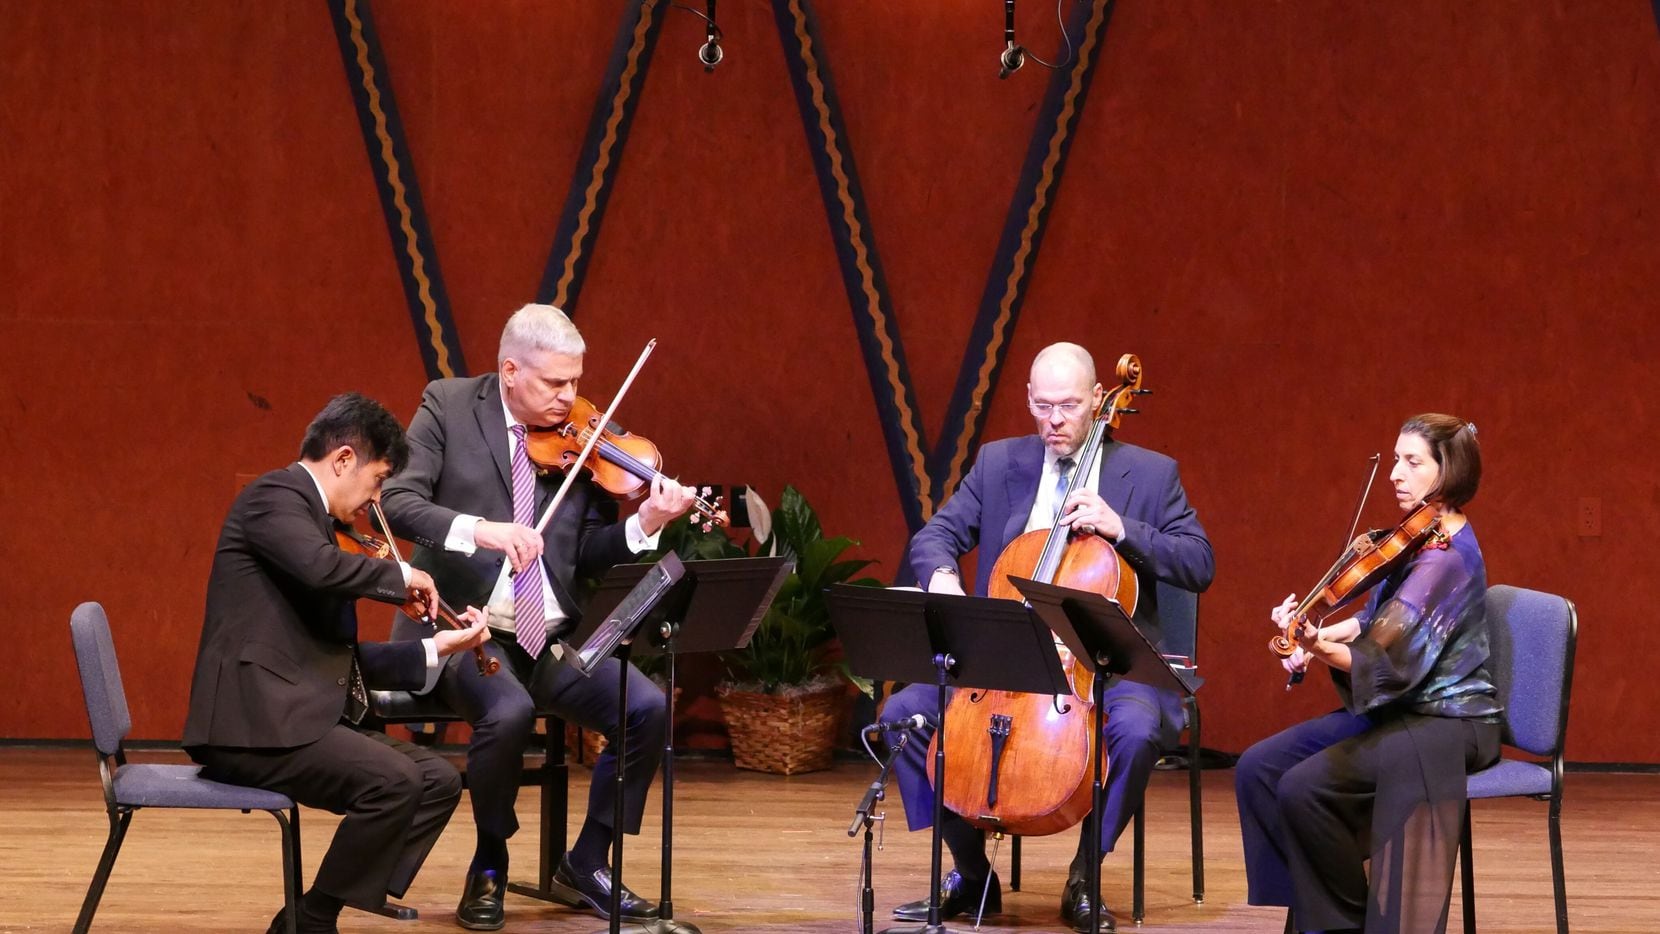 L to R, violinists Jun Iwasaki and Stephen Rose, cellist Brant Taylor and violist Joan...